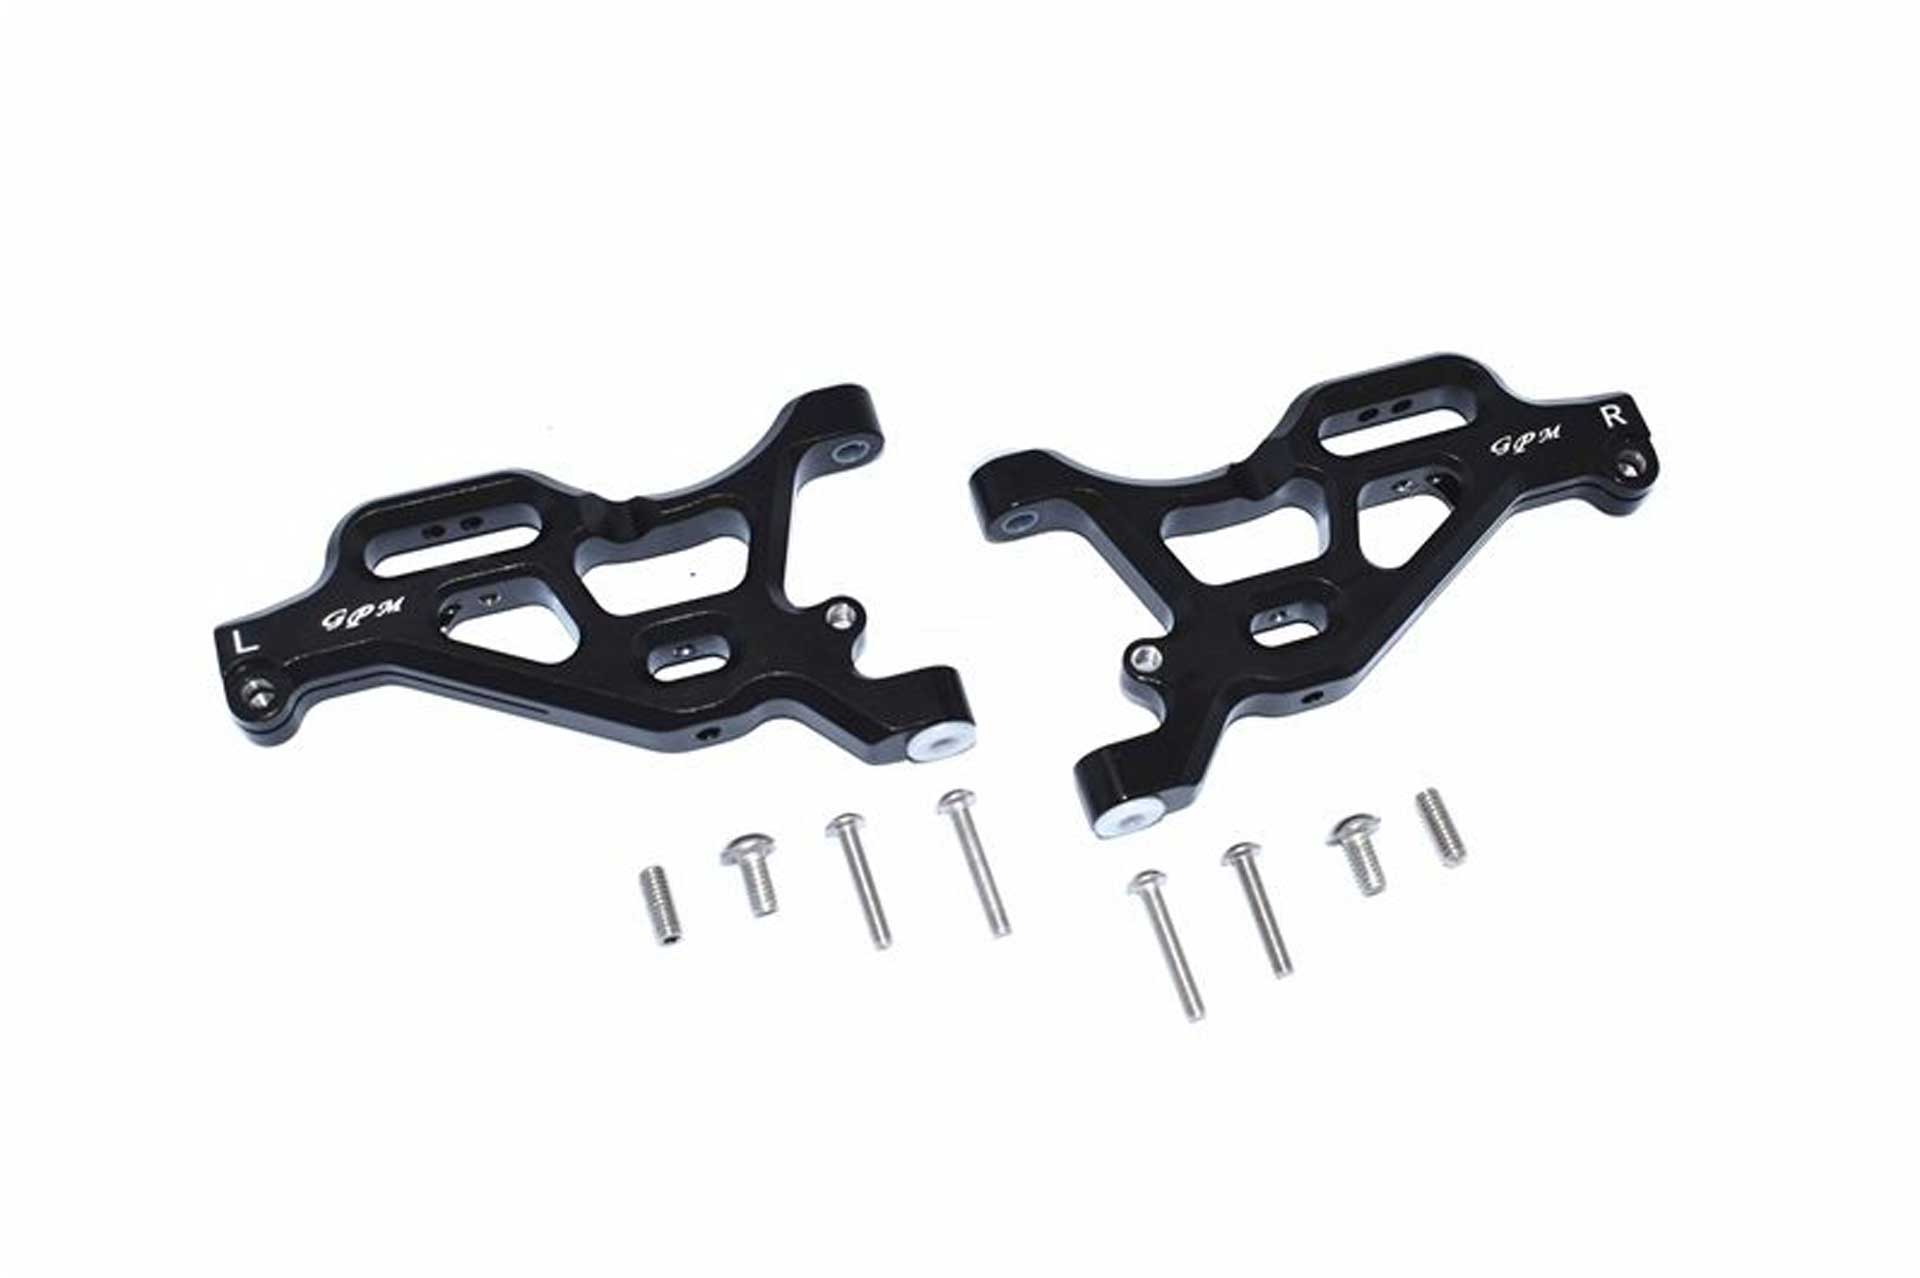 GPM ALUMINUM FRONT LOWER ARMS -10PC SET black GPM ARRMA LIMITLESS INFRACTION TYPHON